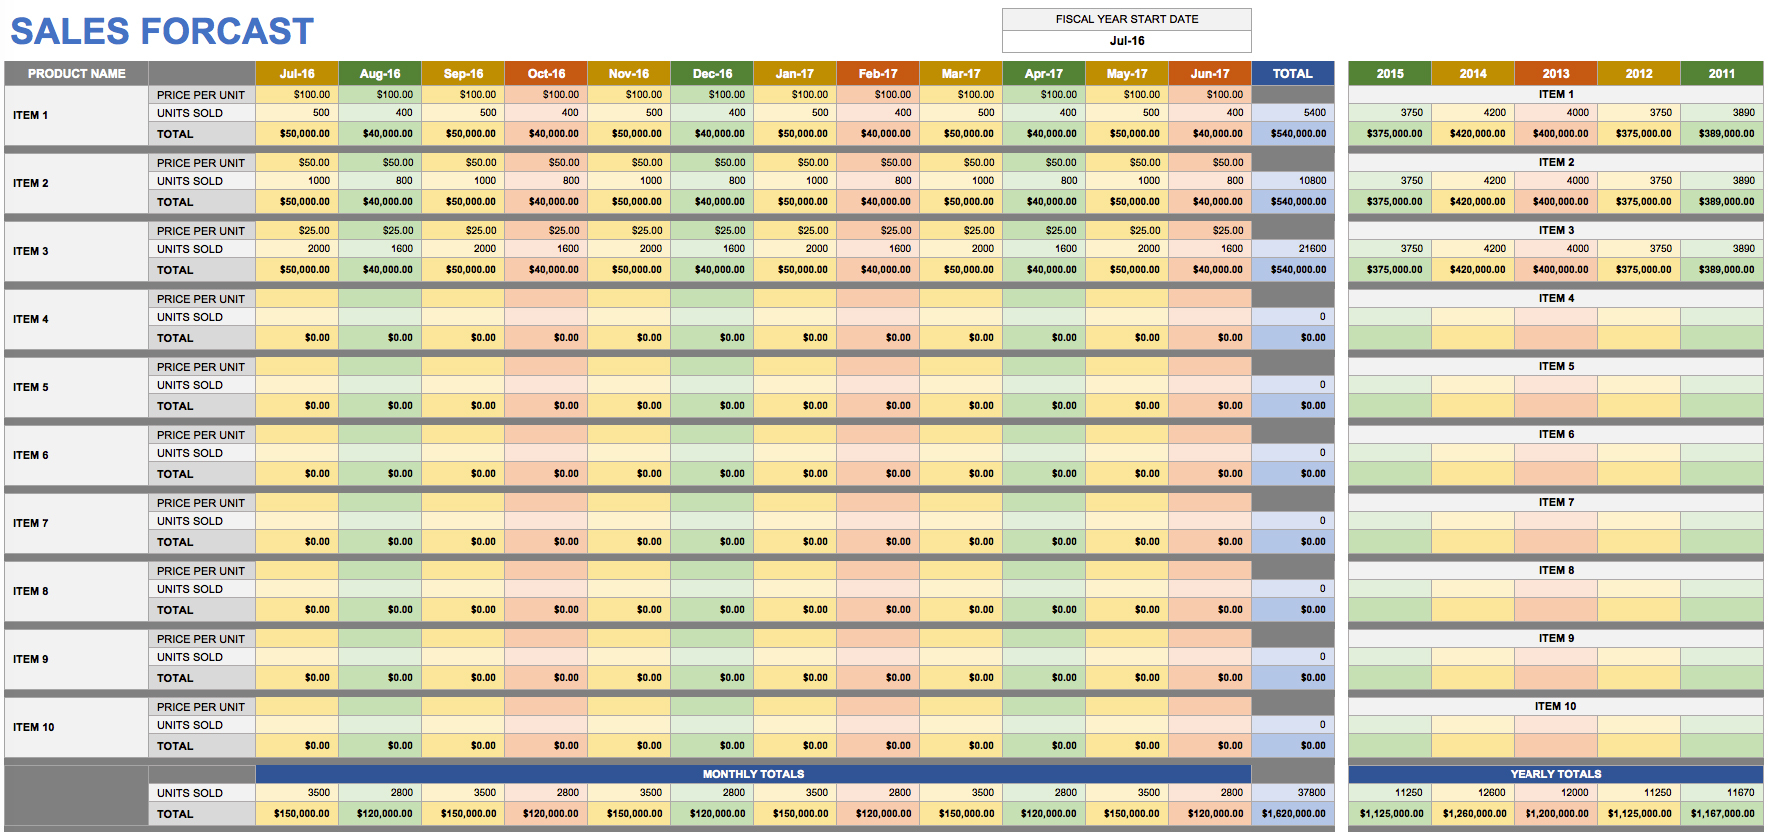 Sales Forecast Spreadsheet Sample Score For Restaurant Excel With Forecast Spreadsheet Template